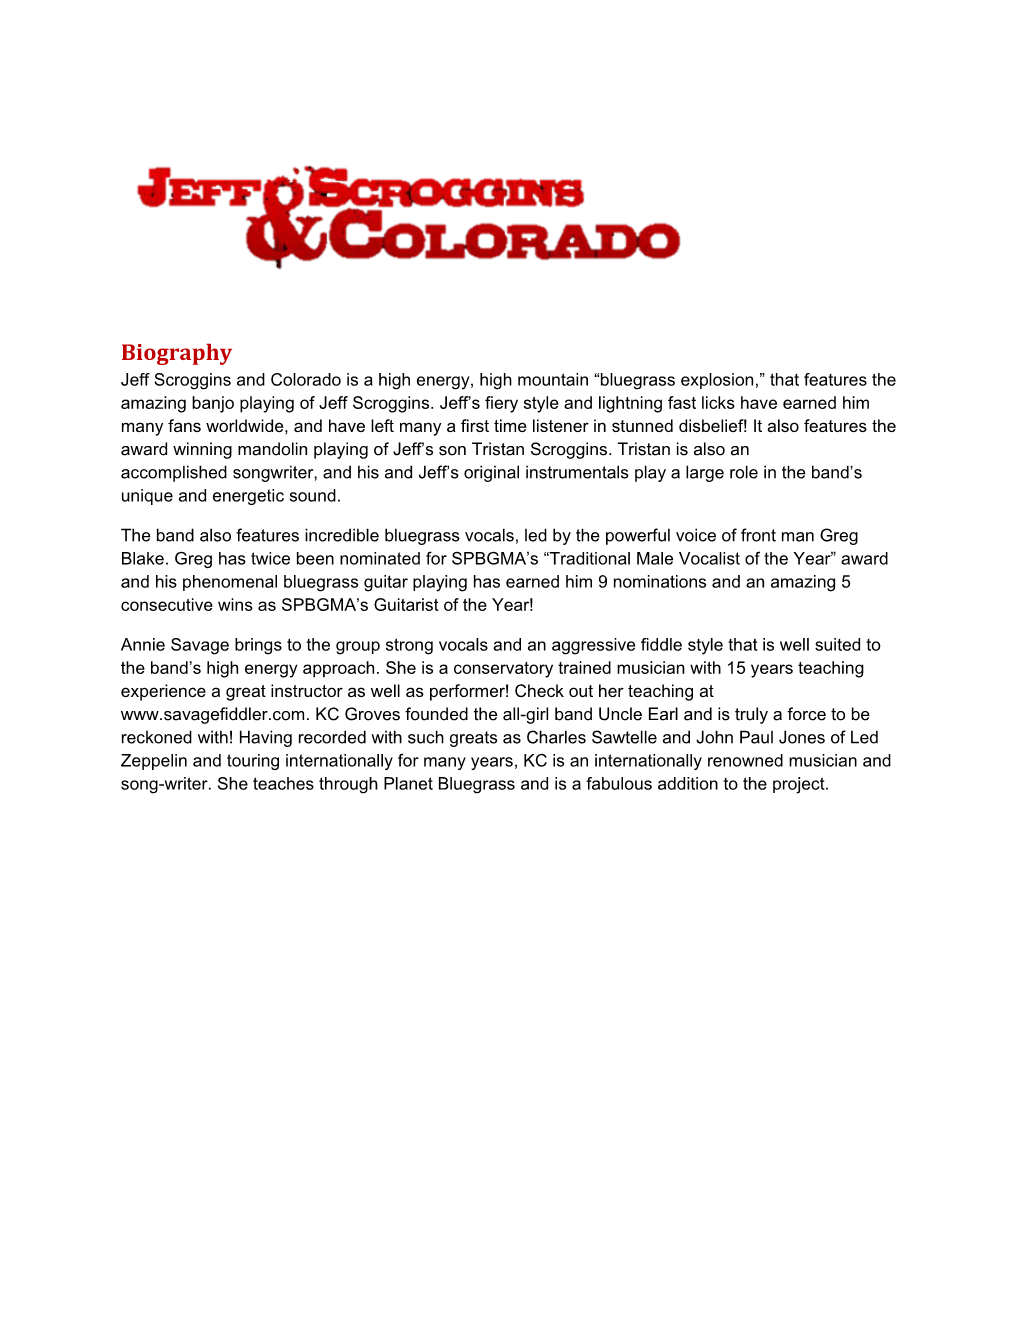 Jeff Scroggins and Colorado Is a High Energy, High Mountain Bluegrass Explosion, That Features